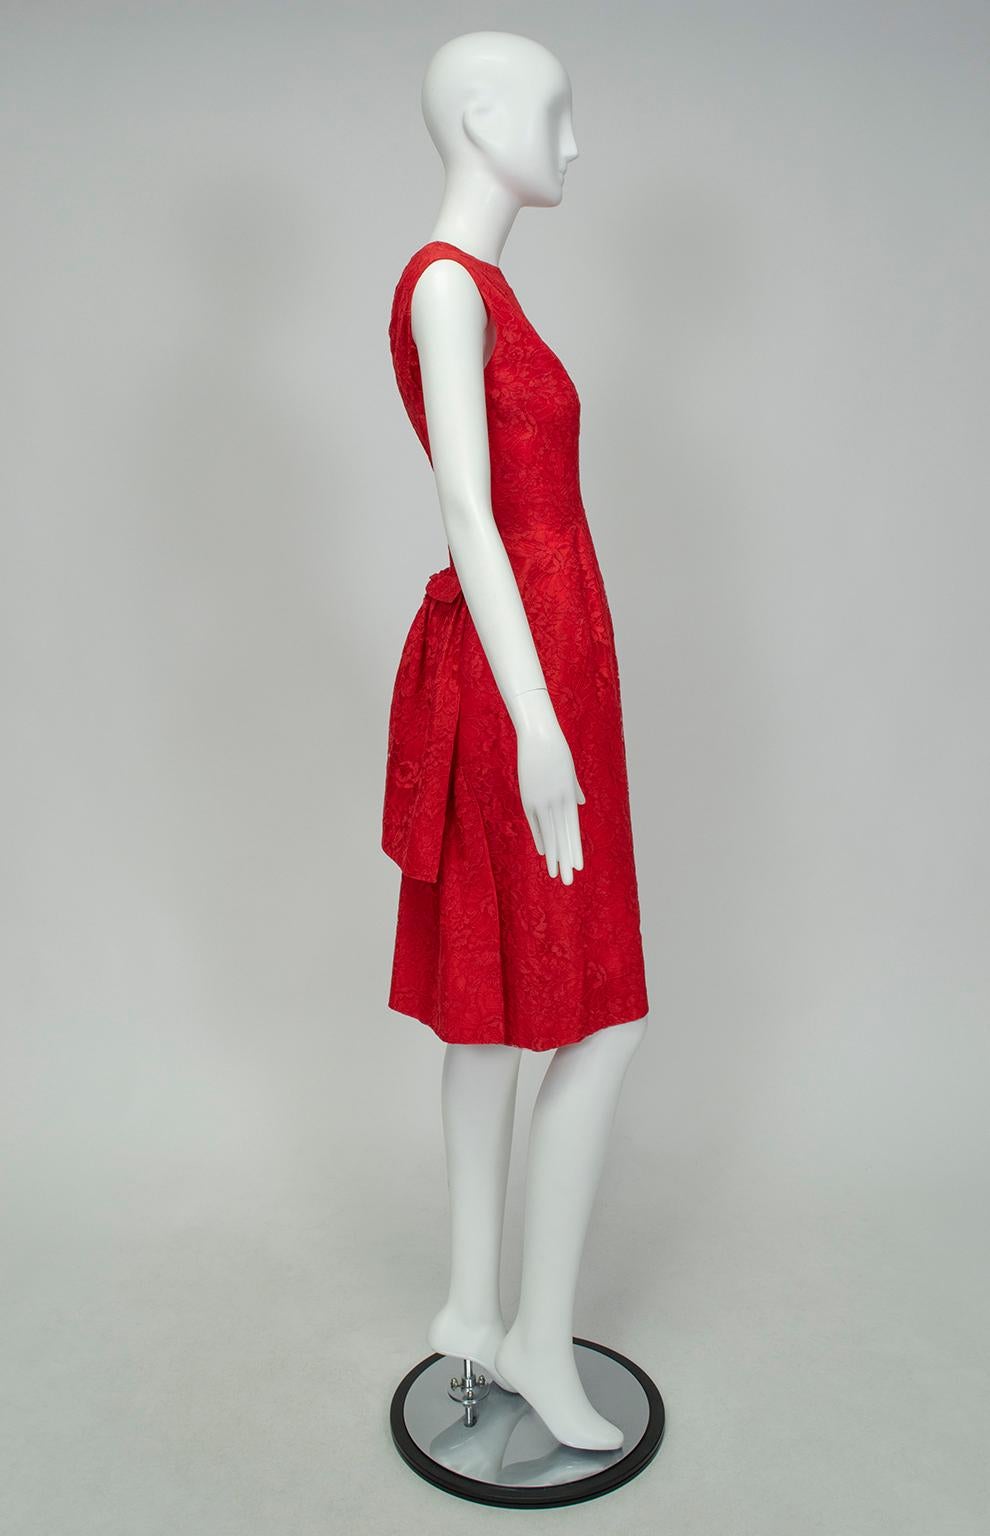 Though his work has only recently begun to be appreciated, Lebanese designer Jacques Cassia was a familiar face among the haute monde in the 1960s and 70s. With its gentle bustle and backless silhouette, this cocktail dress is an extremely rare